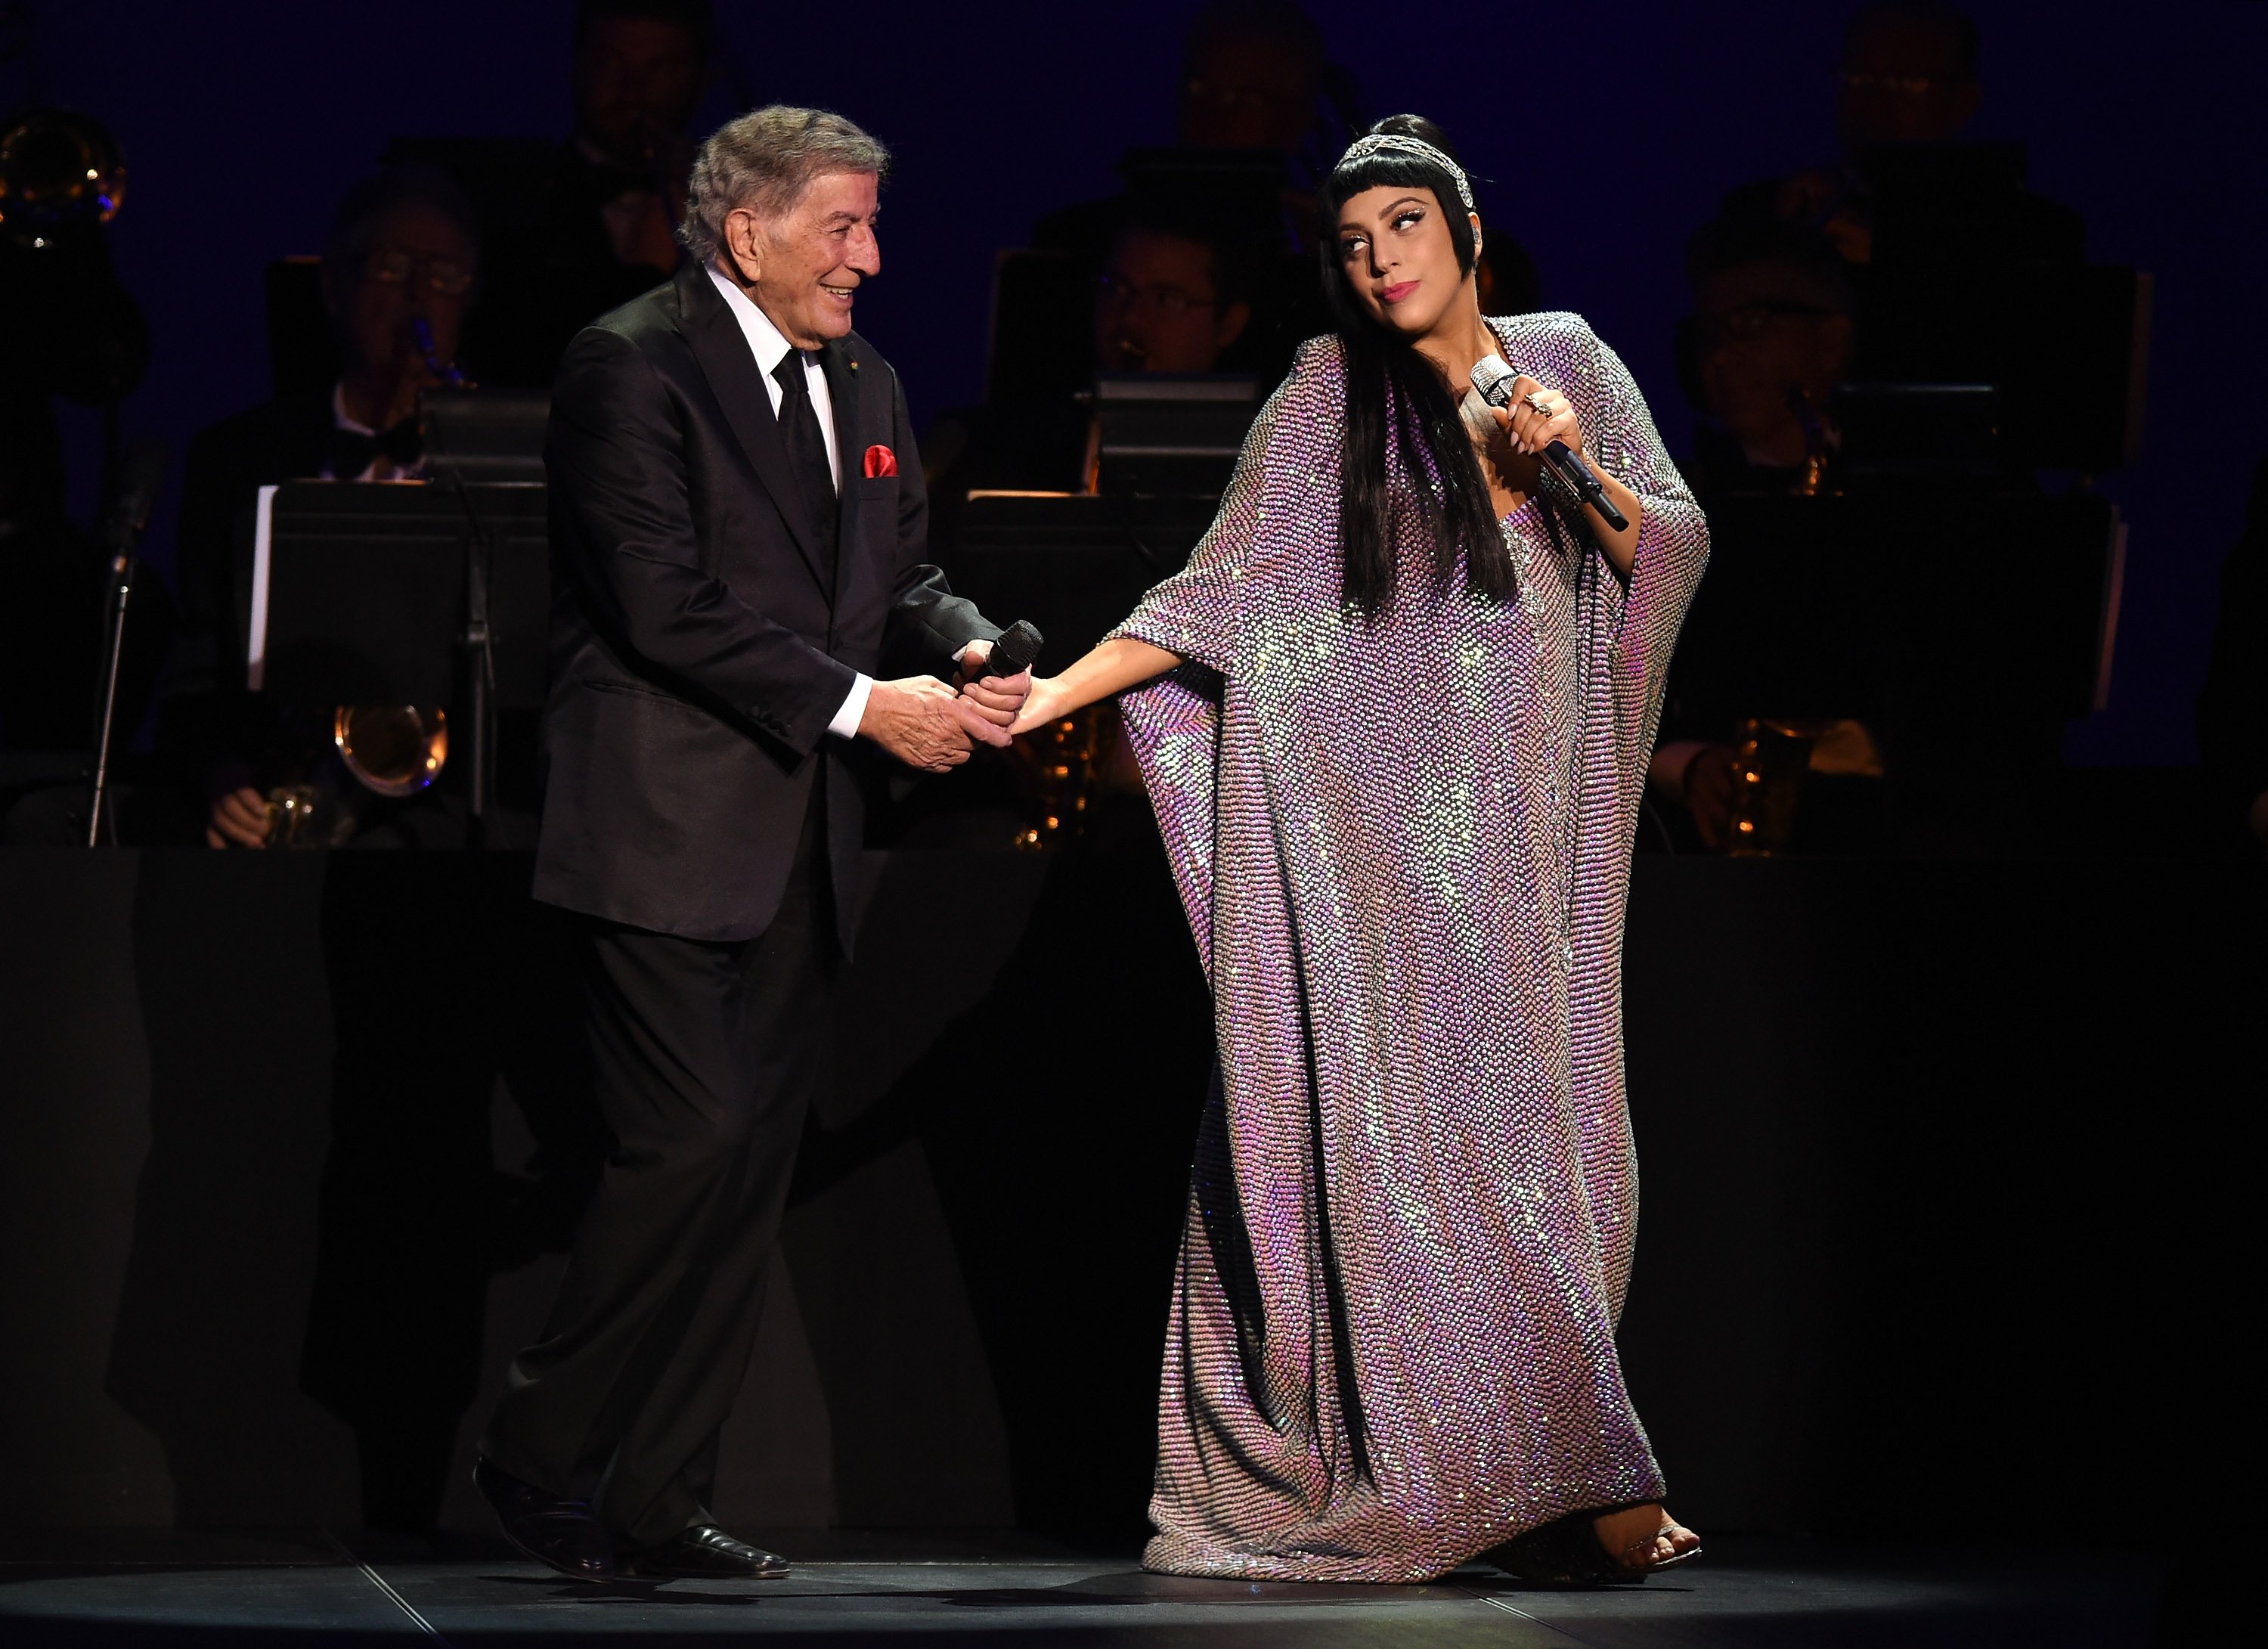 Tony Bennett singing songs with Lady Gaga in front of a piano